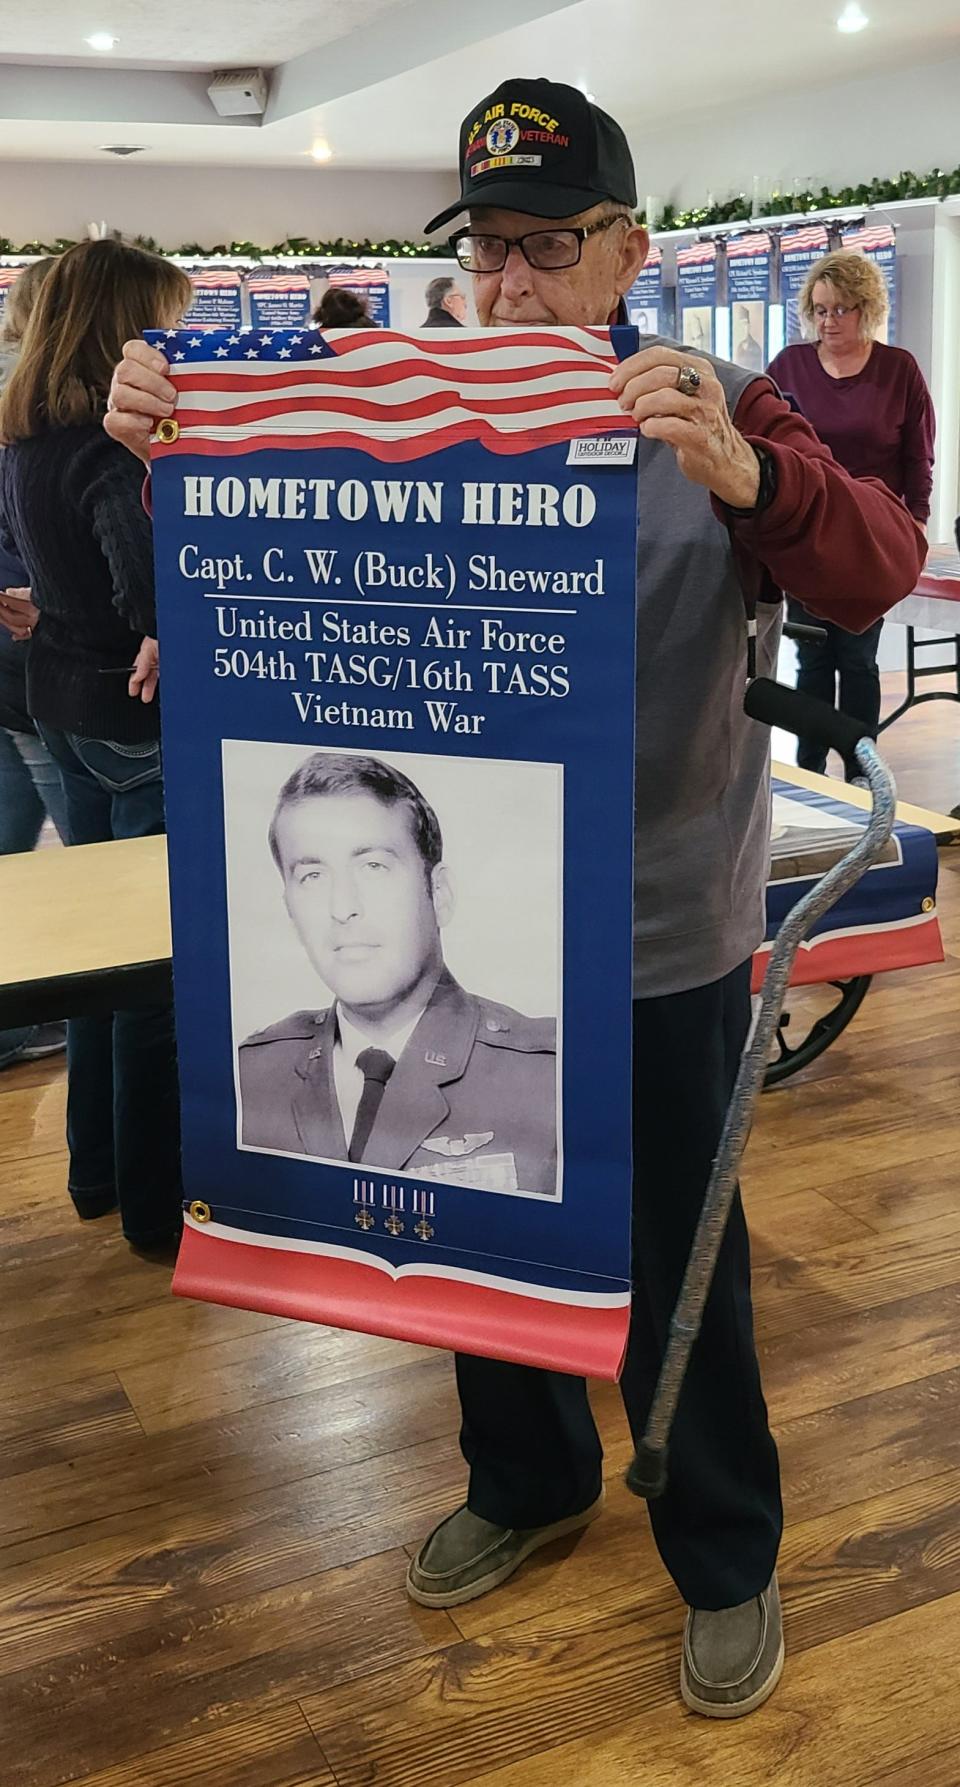 Captain Sheward served in the Air Force during the Vietnam War. He is seen here posing with his banner that will hang over the road in Frankfort.